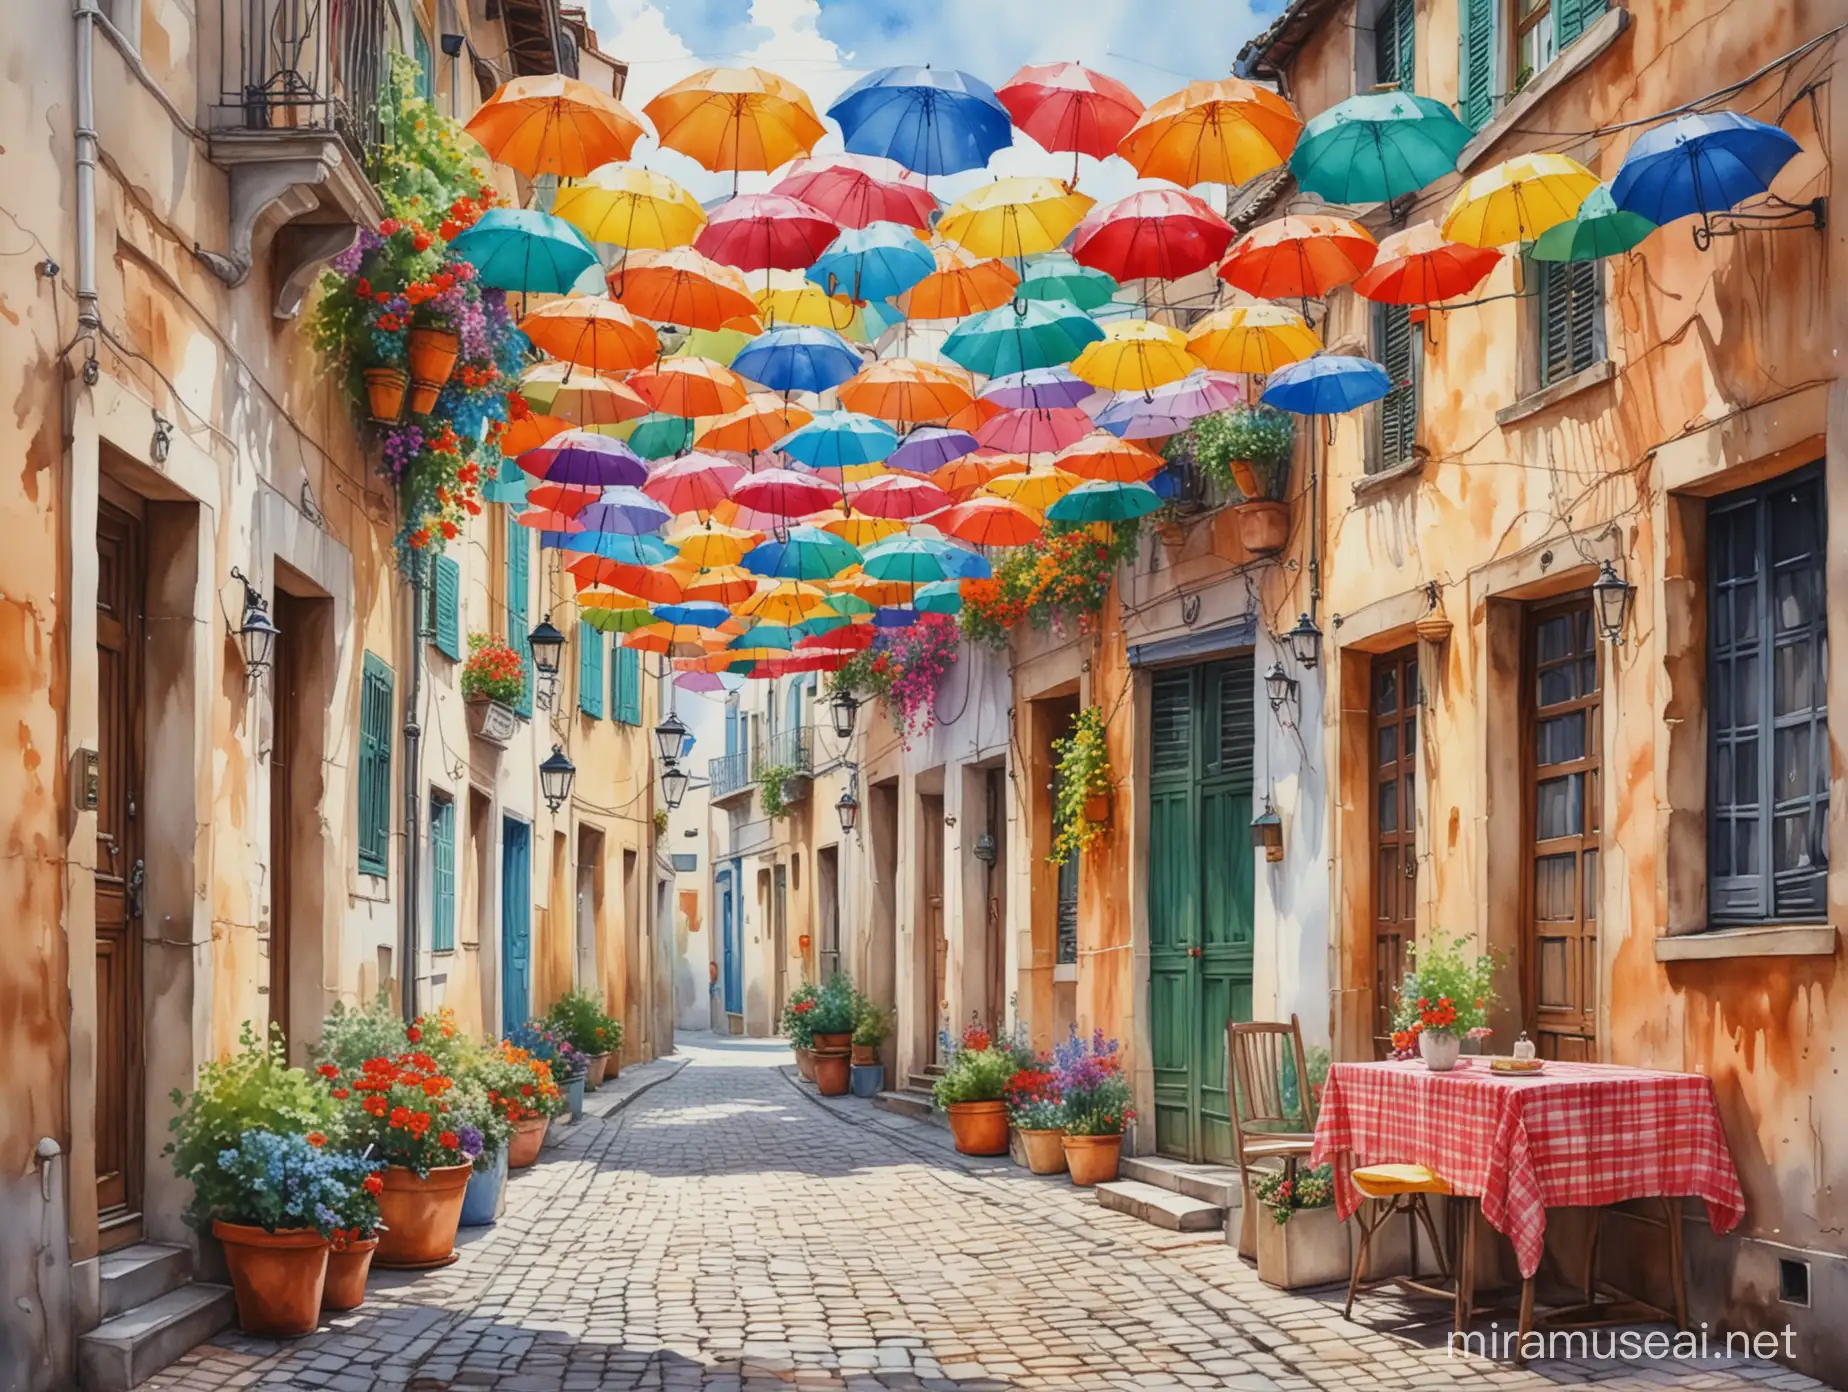 Quaint Cobblestone Street with Upside Down Umbrella Canopy and Flower Adorned Houses